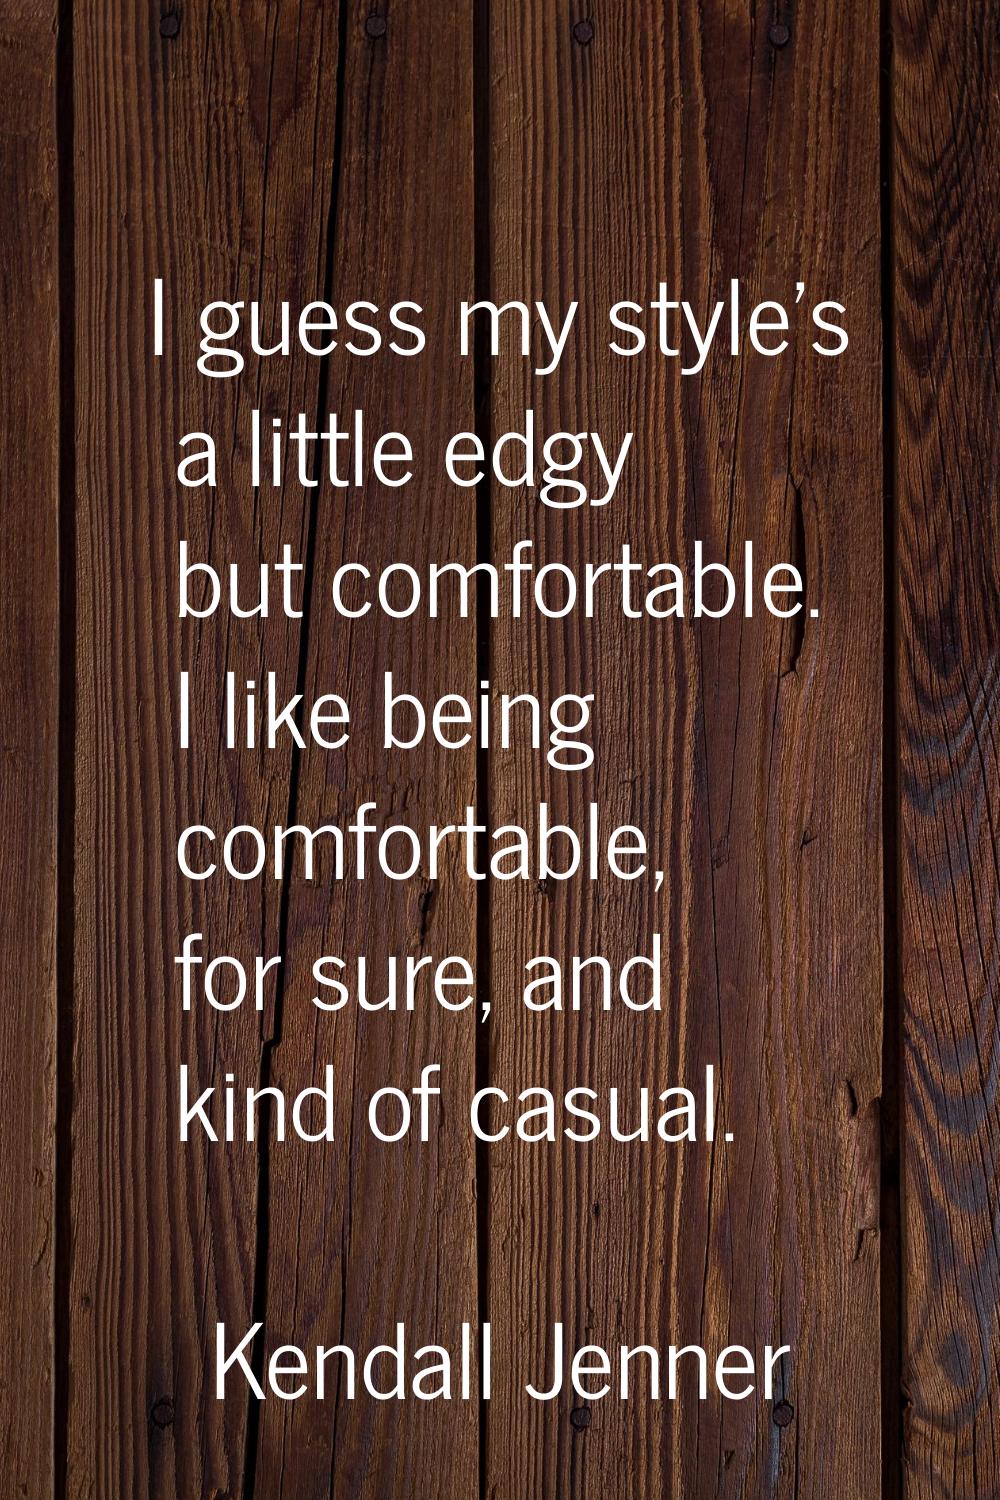 I guess my style's a little edgy but comfortable. I like being comfortable, for sure, and kind of c